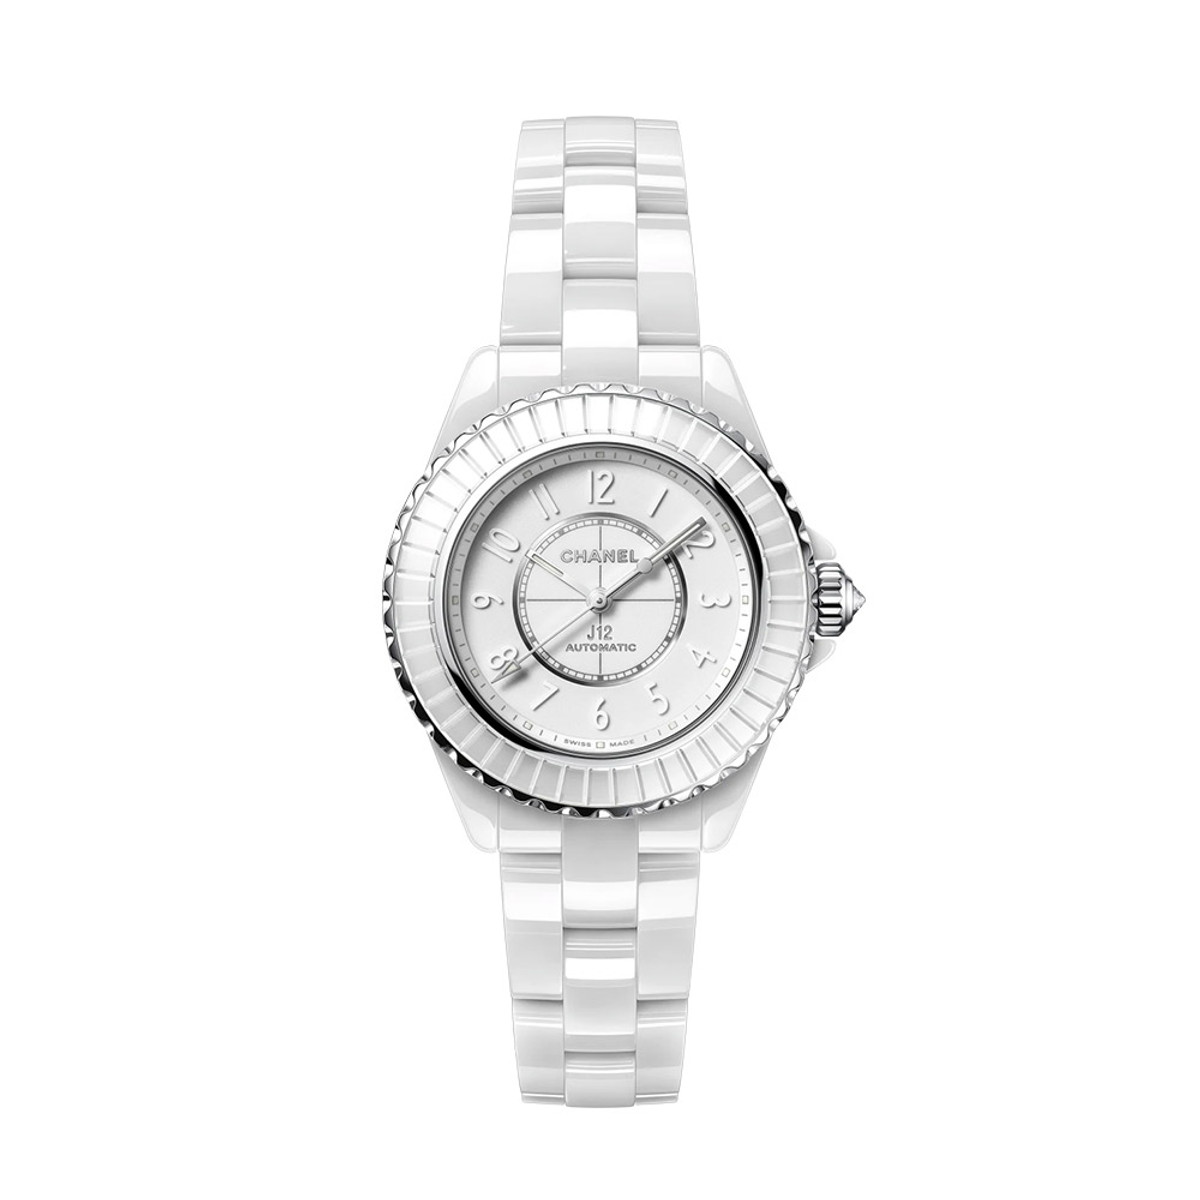 CHANEL J12 CALIBER 12.2 EDITION 1 WATCH, 33 MM-29530 Product Image